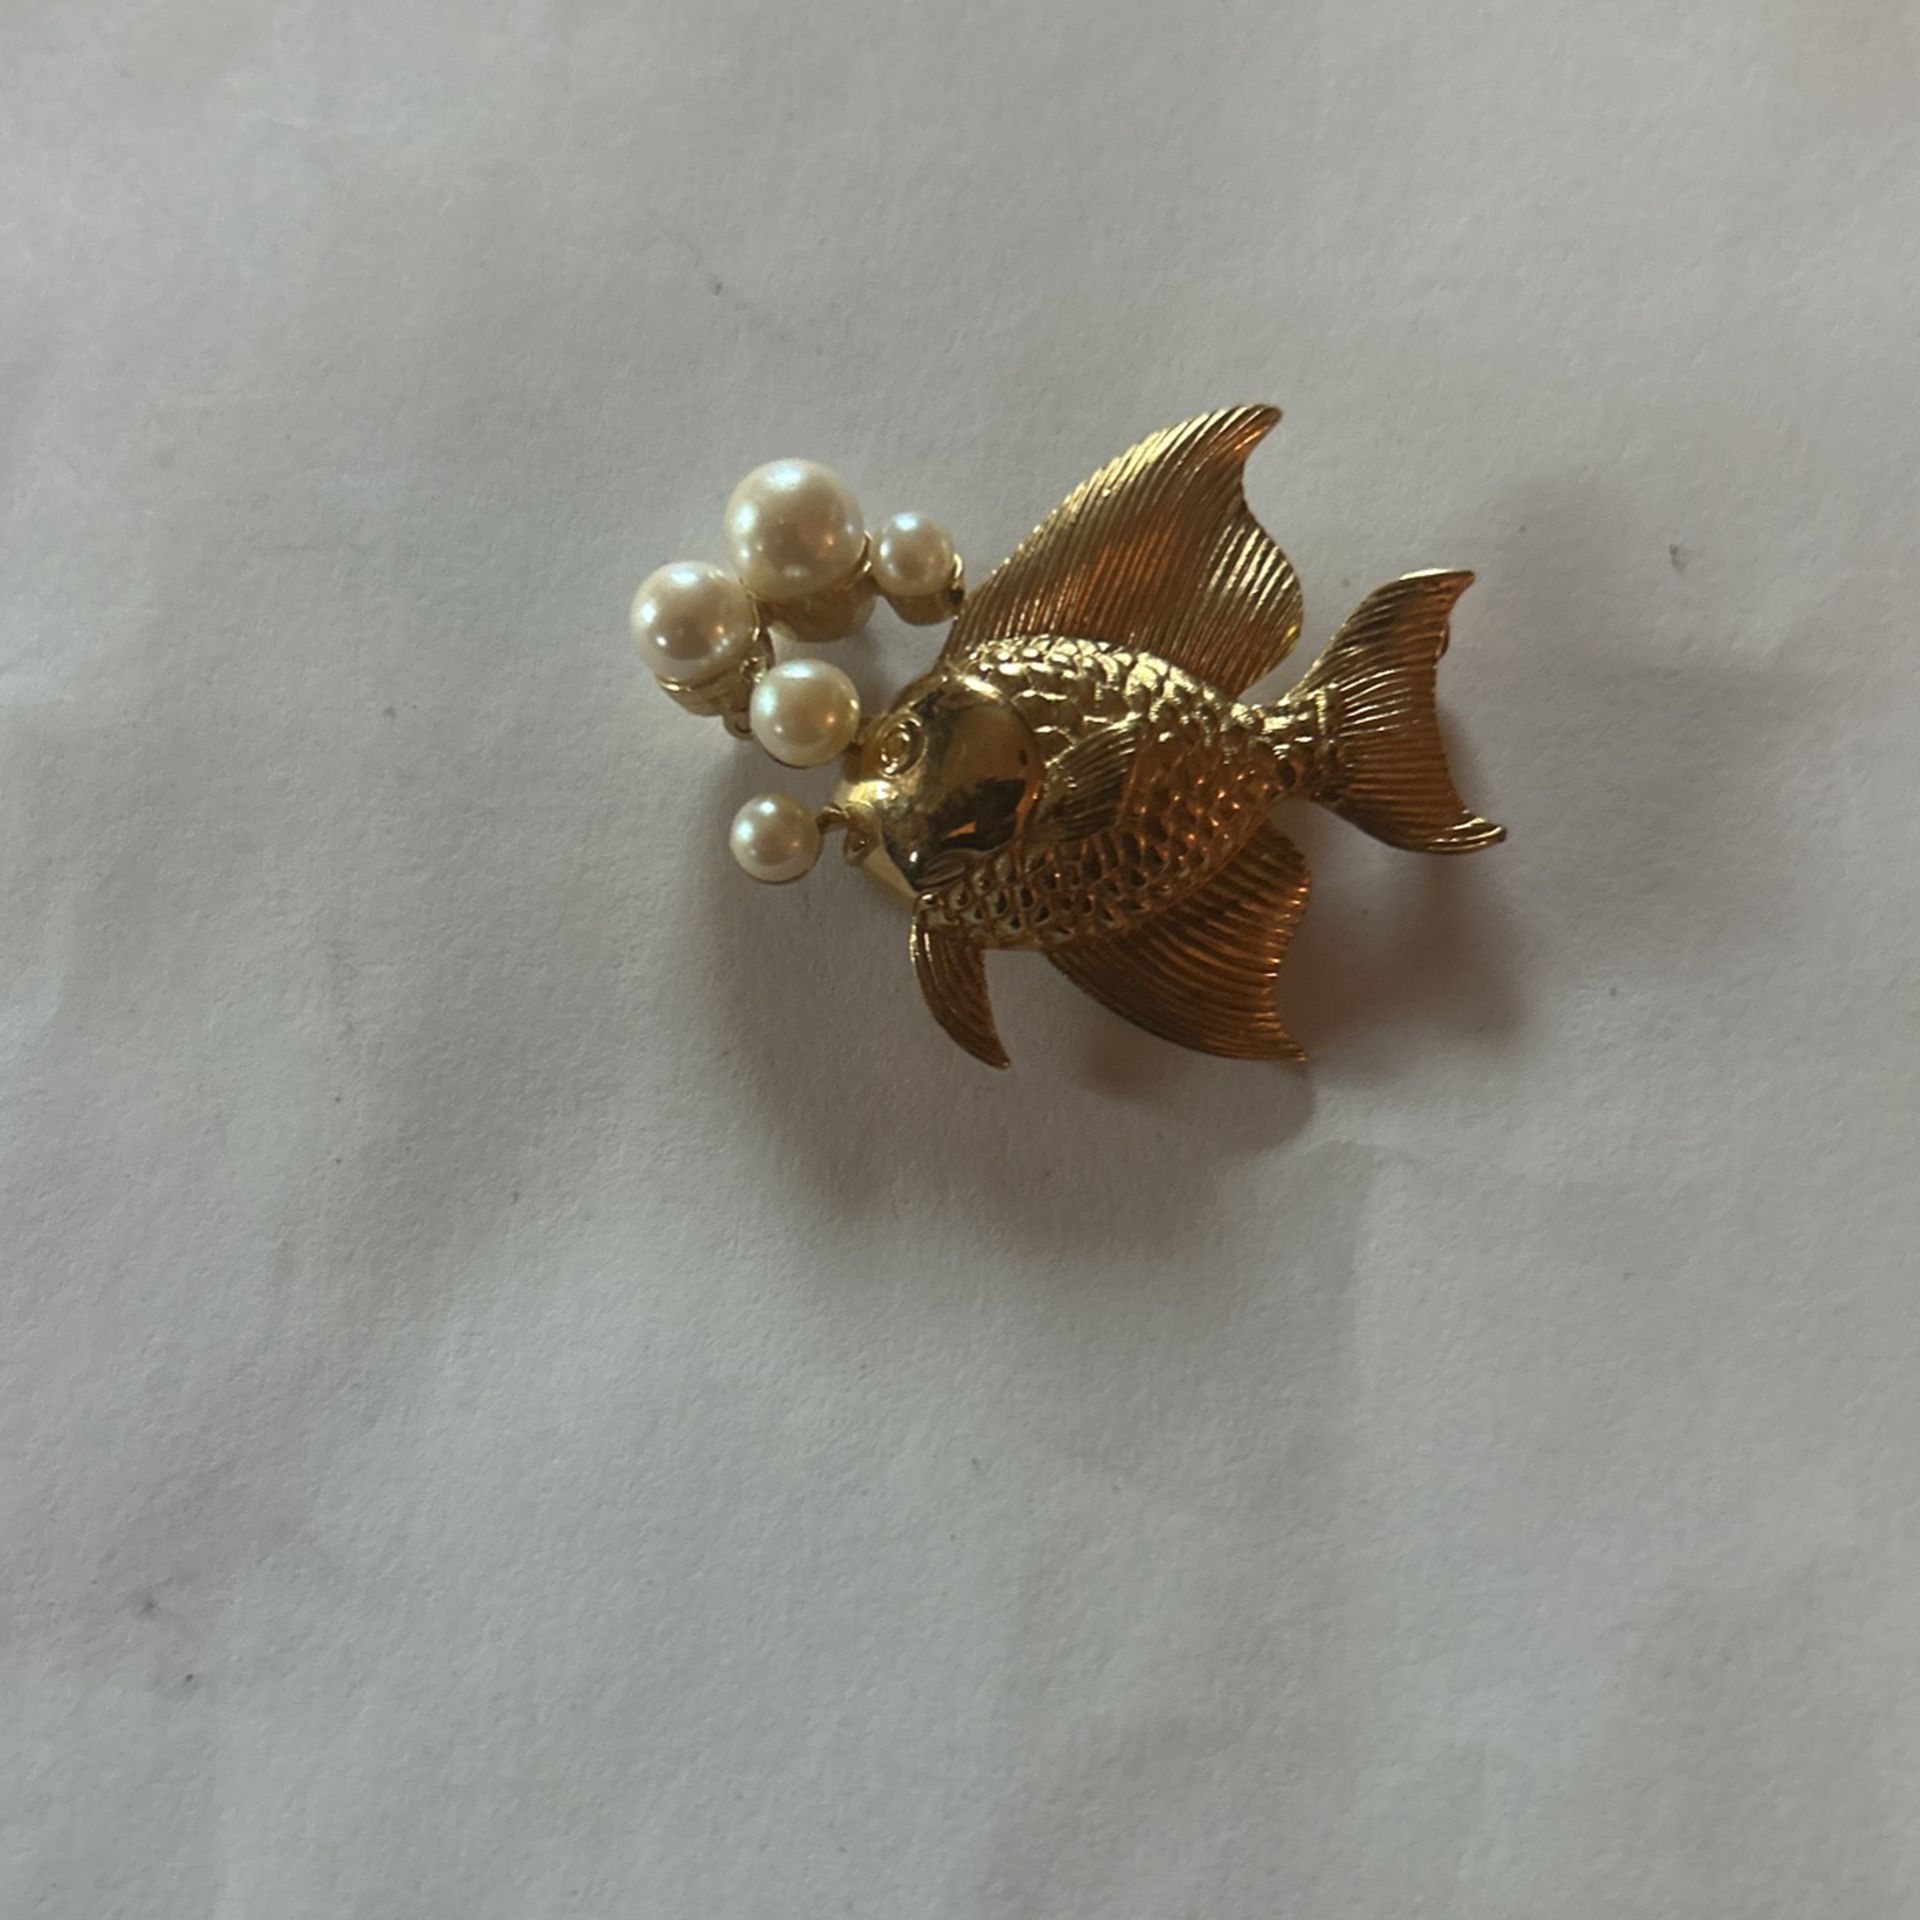 Vintage Gold Tone Tropical Angel Fish With Faux Pearl Bubbled Brooch or Pin